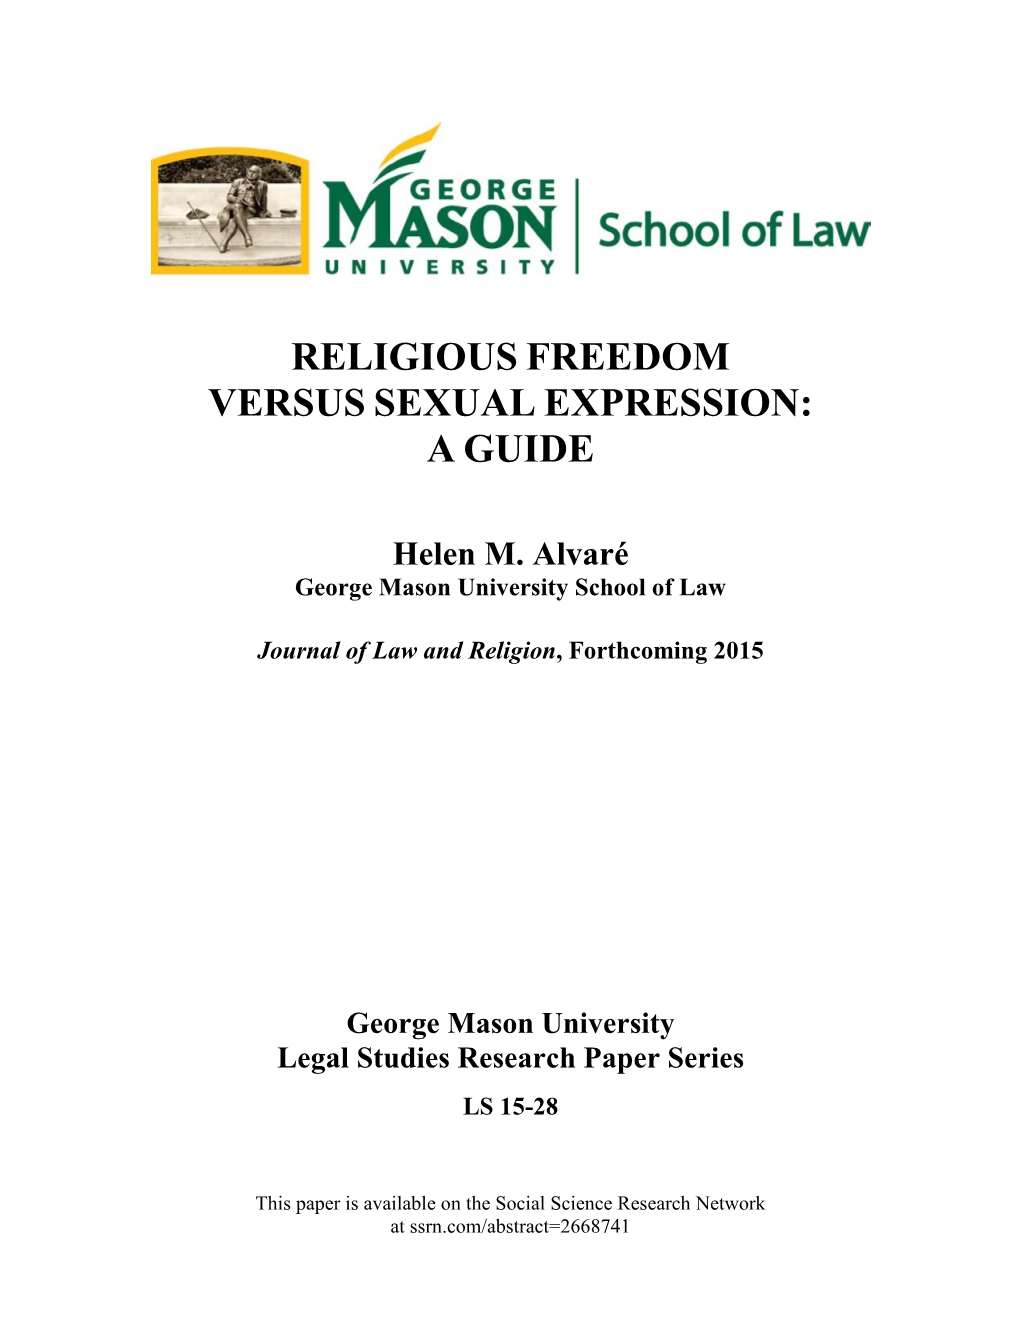 Religious Freedom Versus Sexual Expression: a Guide